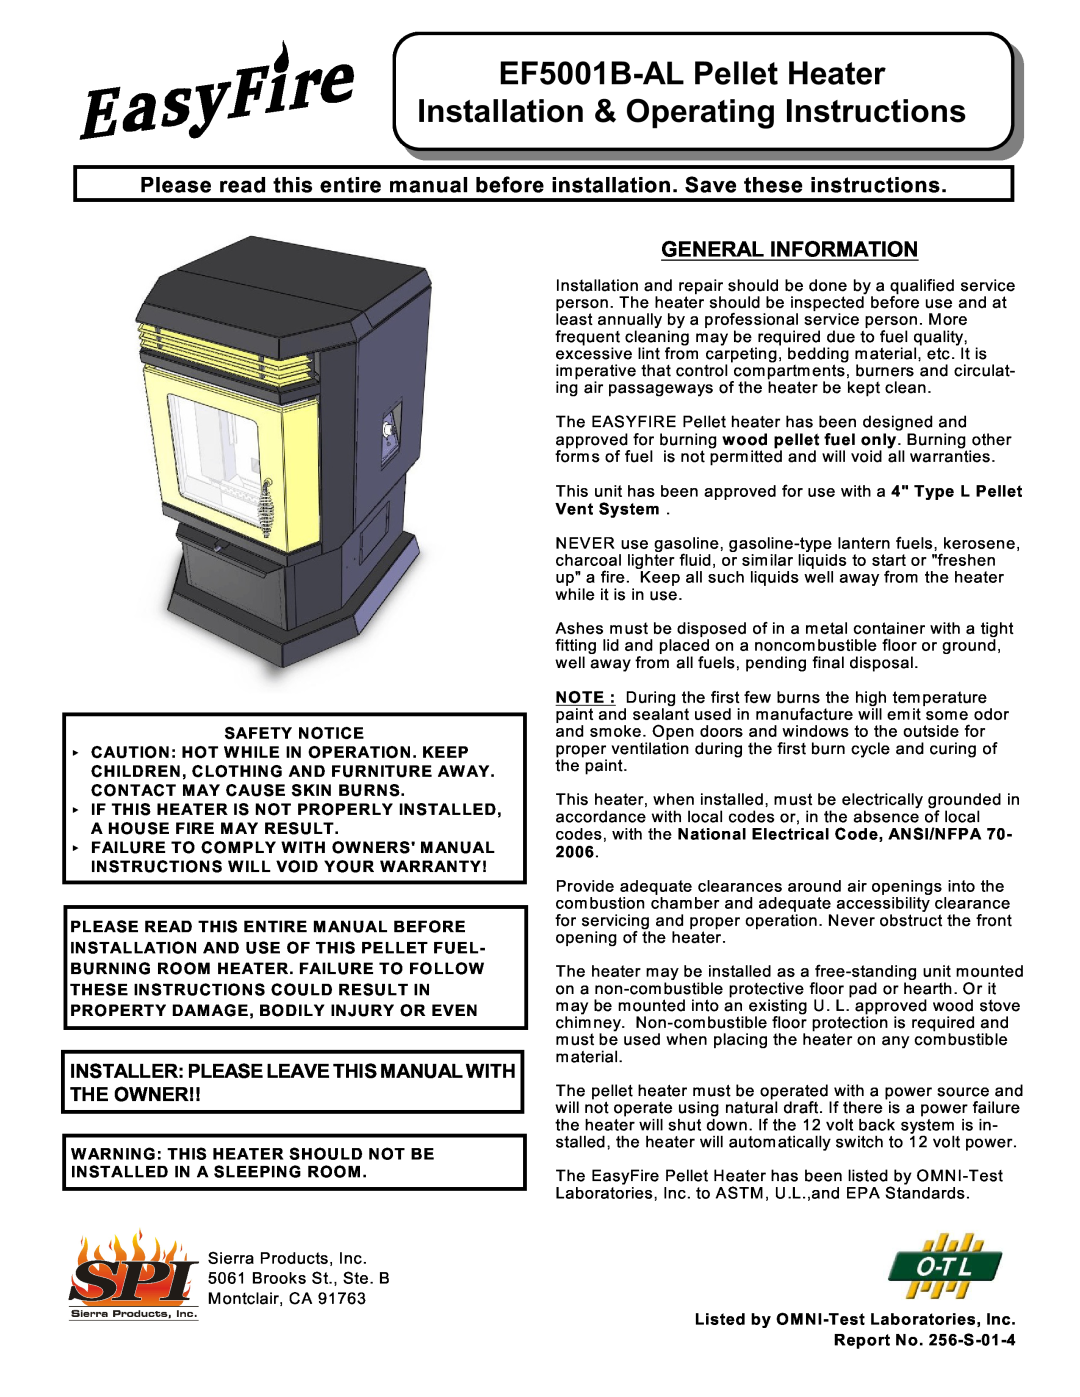 Sierra Products owner manual General Information, EF5001B-ALPellet Heater, Installation & Operating Instructions 